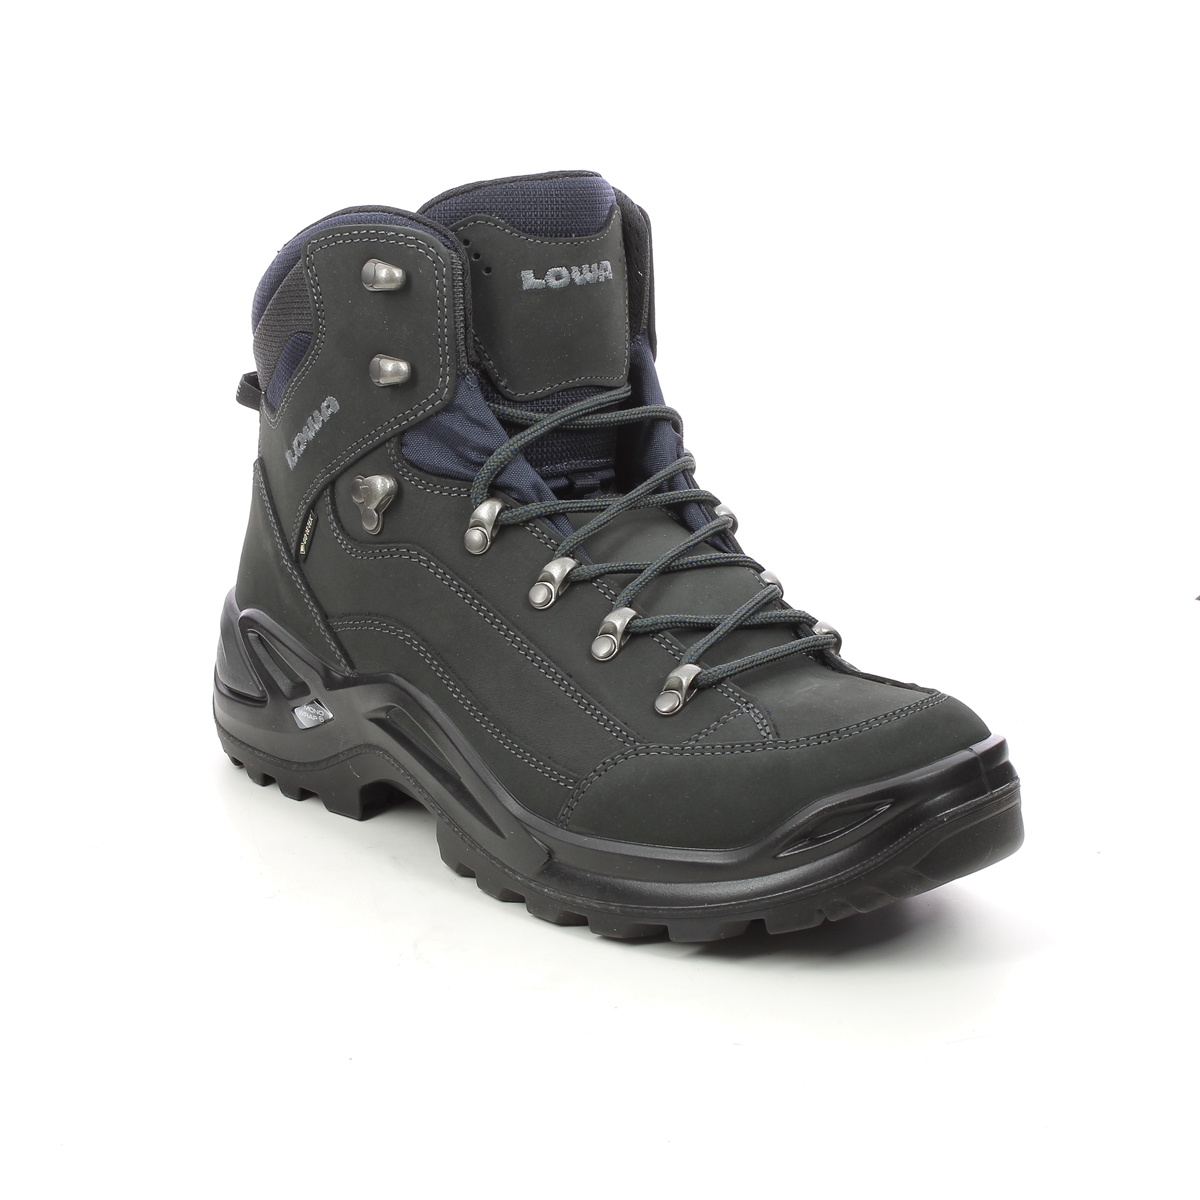 Lowa Renegade Gtx Mid Dark grey nubuck Mens Outdoor Walking Boots 310945-0954 in a Plain Leather in Size 8.5